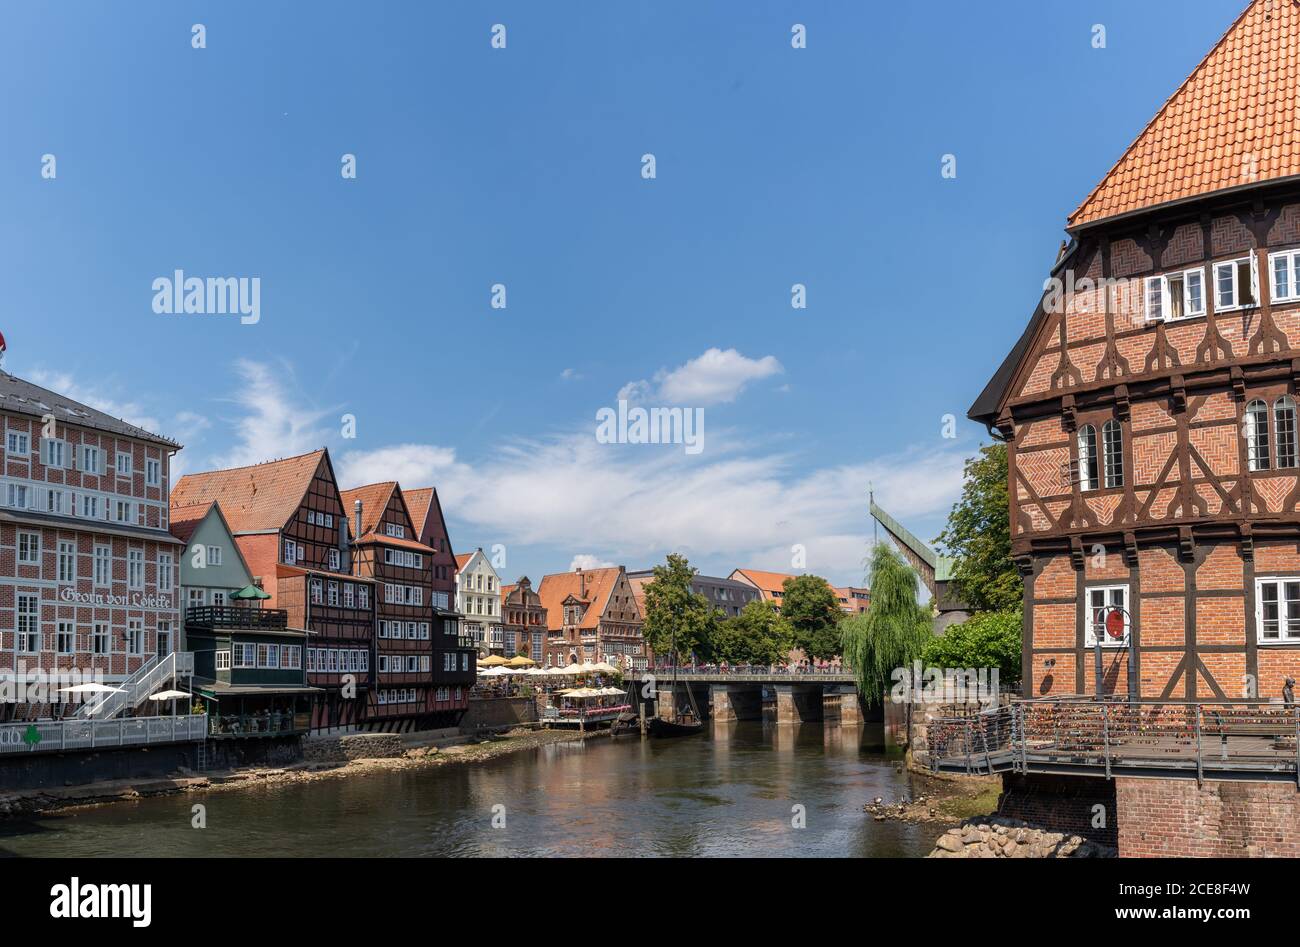 Lunenburg, LS, Germany - 8 August 2020: view of the river and the historic old city center of Luneburg in northern Germany Stock Photo